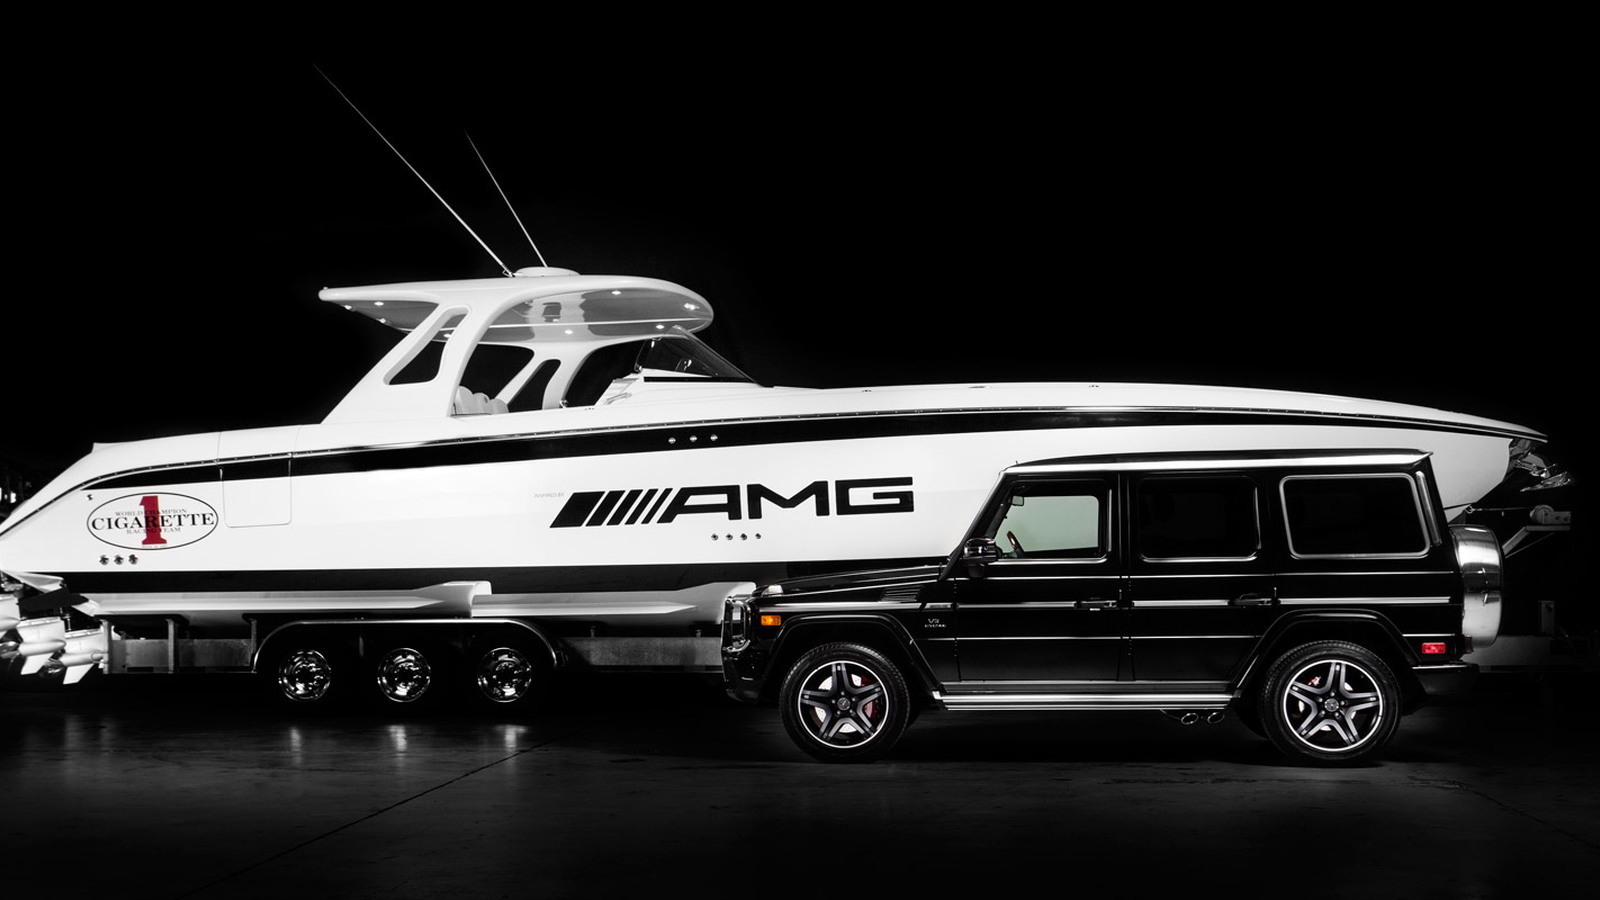 Meet Cigarette Racing S Huntress The 42 Foot Boat Inspired By Mercedes G63 Amg Used cigarette racing power boats for sale from around the world. 42 foot boat inspired by mercedes g63 amg